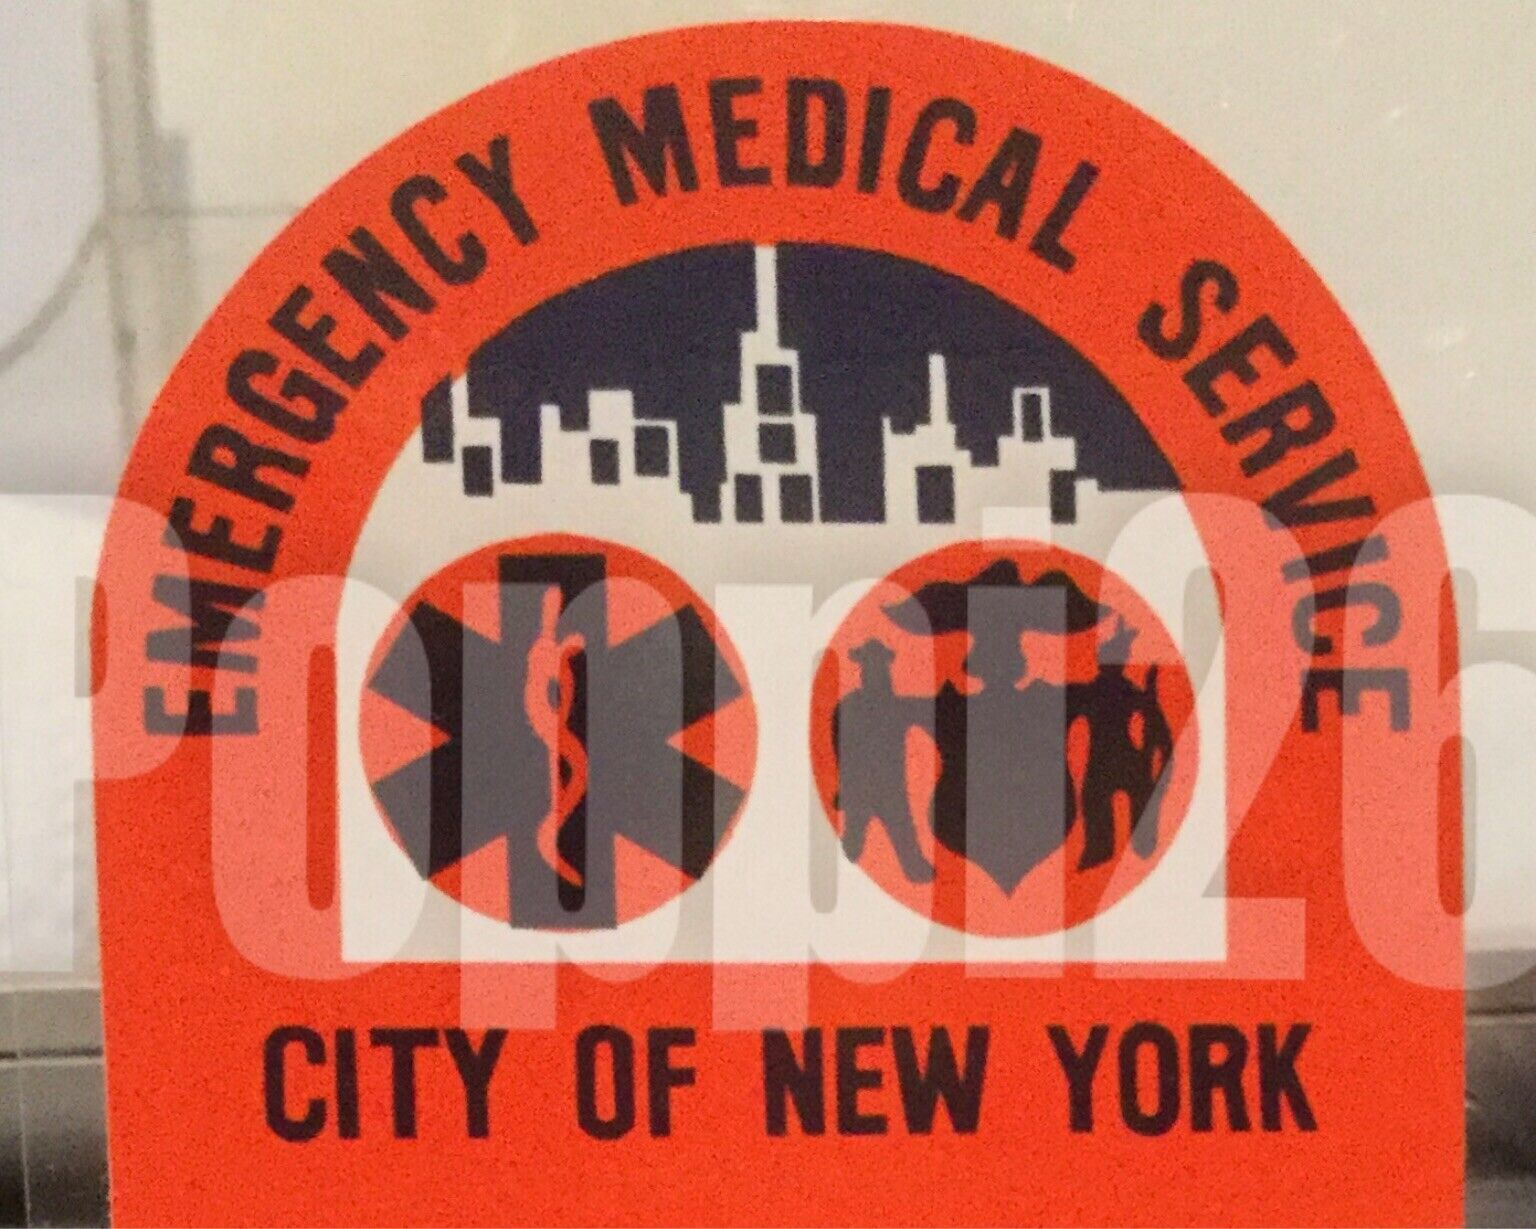 NYS NY NYC New York City OFFICIAL Emergency Medical Service Decal Sticker